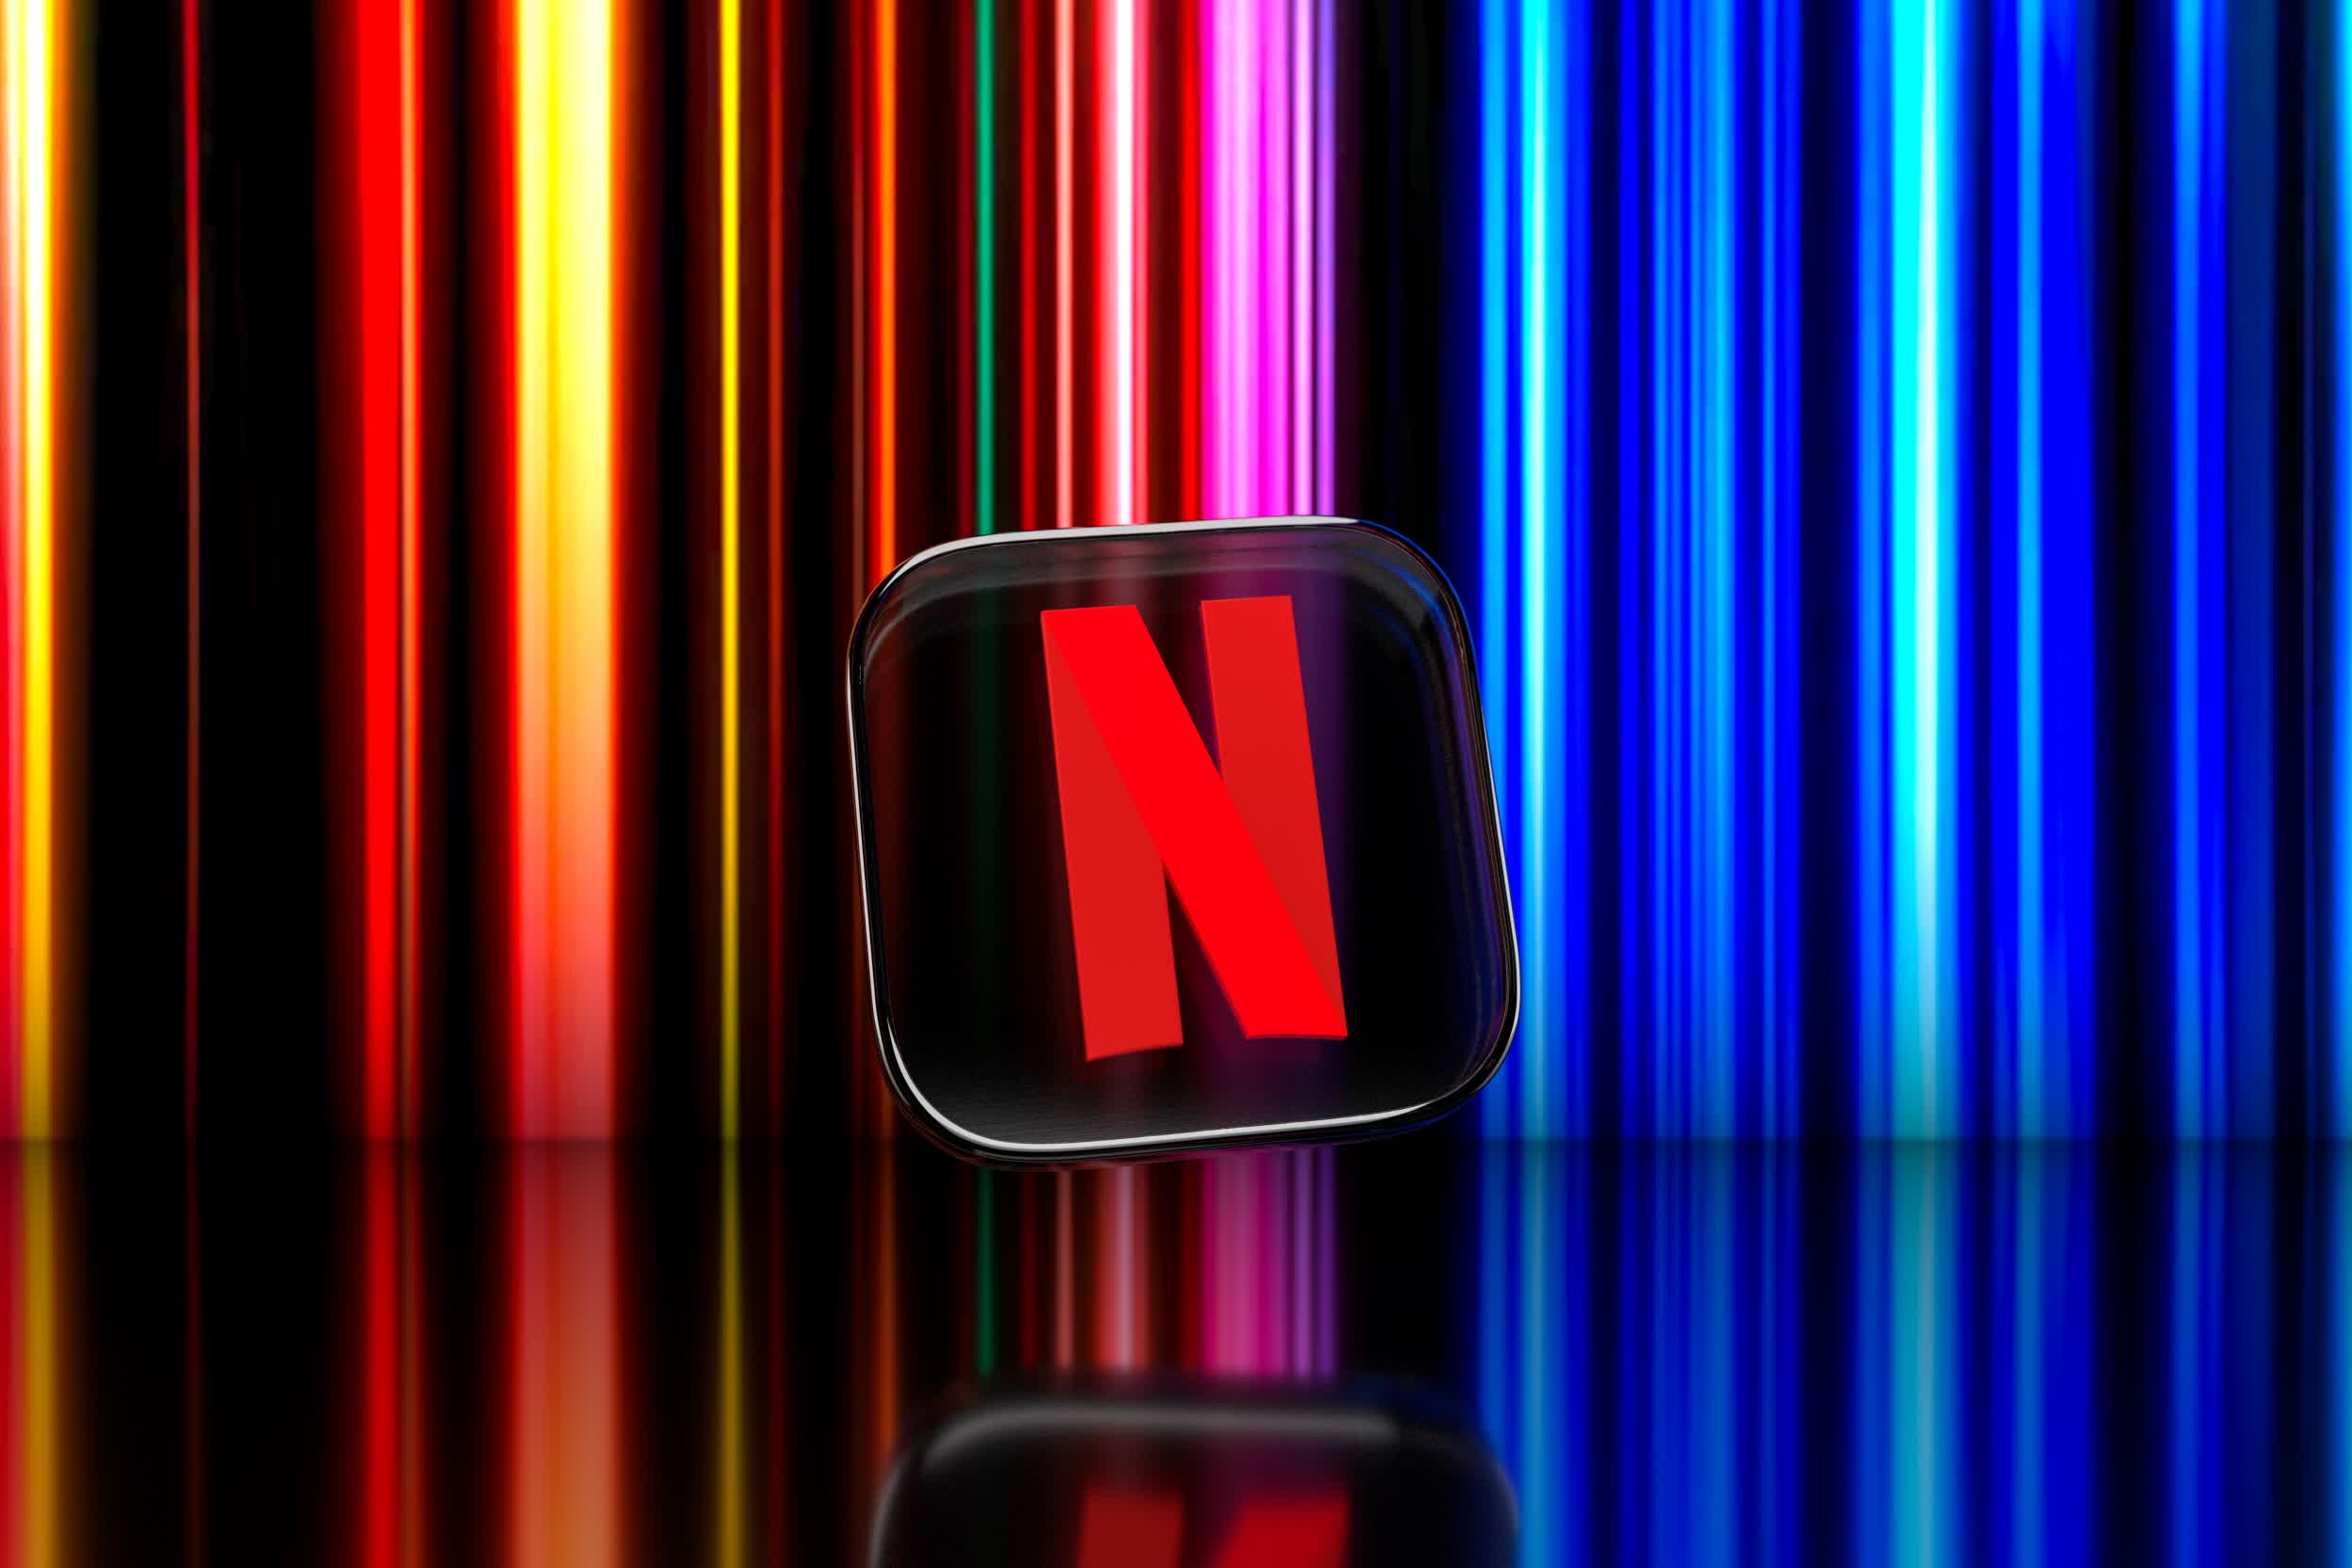 Netflix has no plans to follow Disney+ in offering an ad-supported tier, but never say never